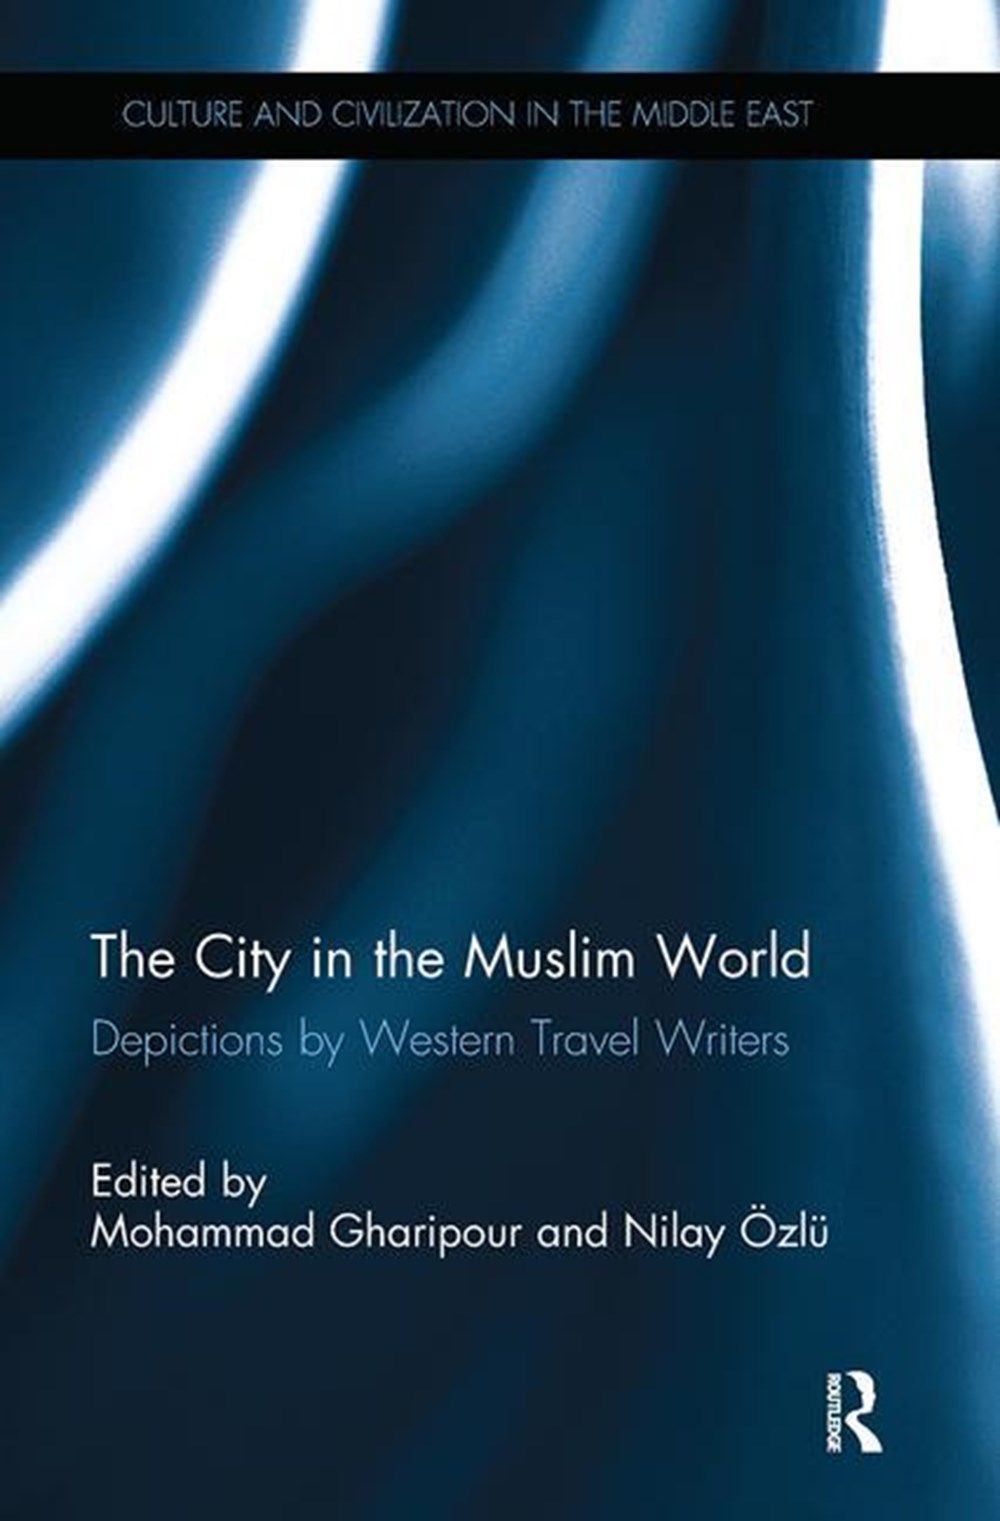 City in the Muslim World: Depictions by Western Travel Writers